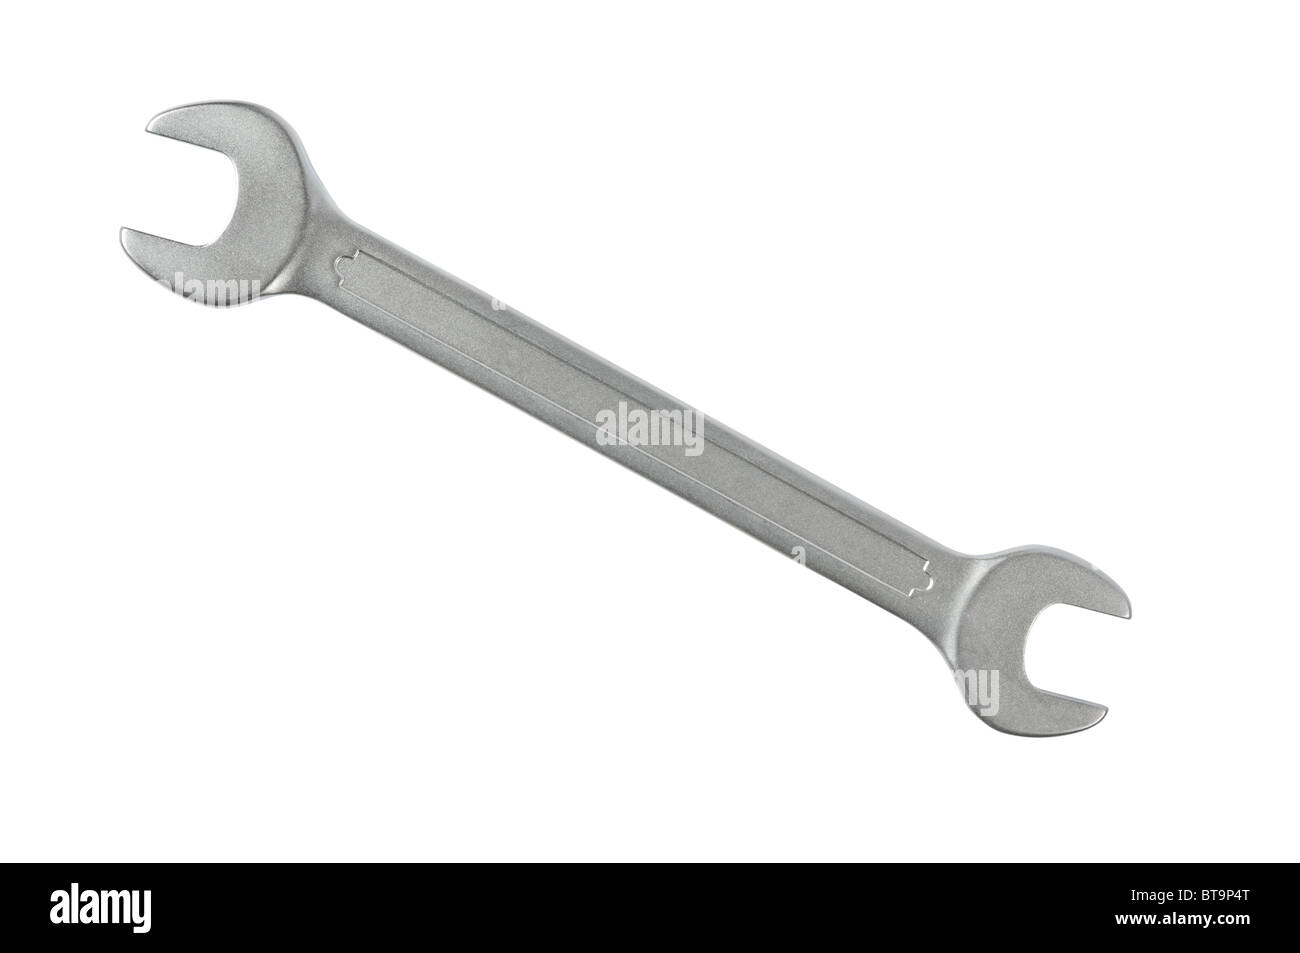 Wrench against white background Stock Photo